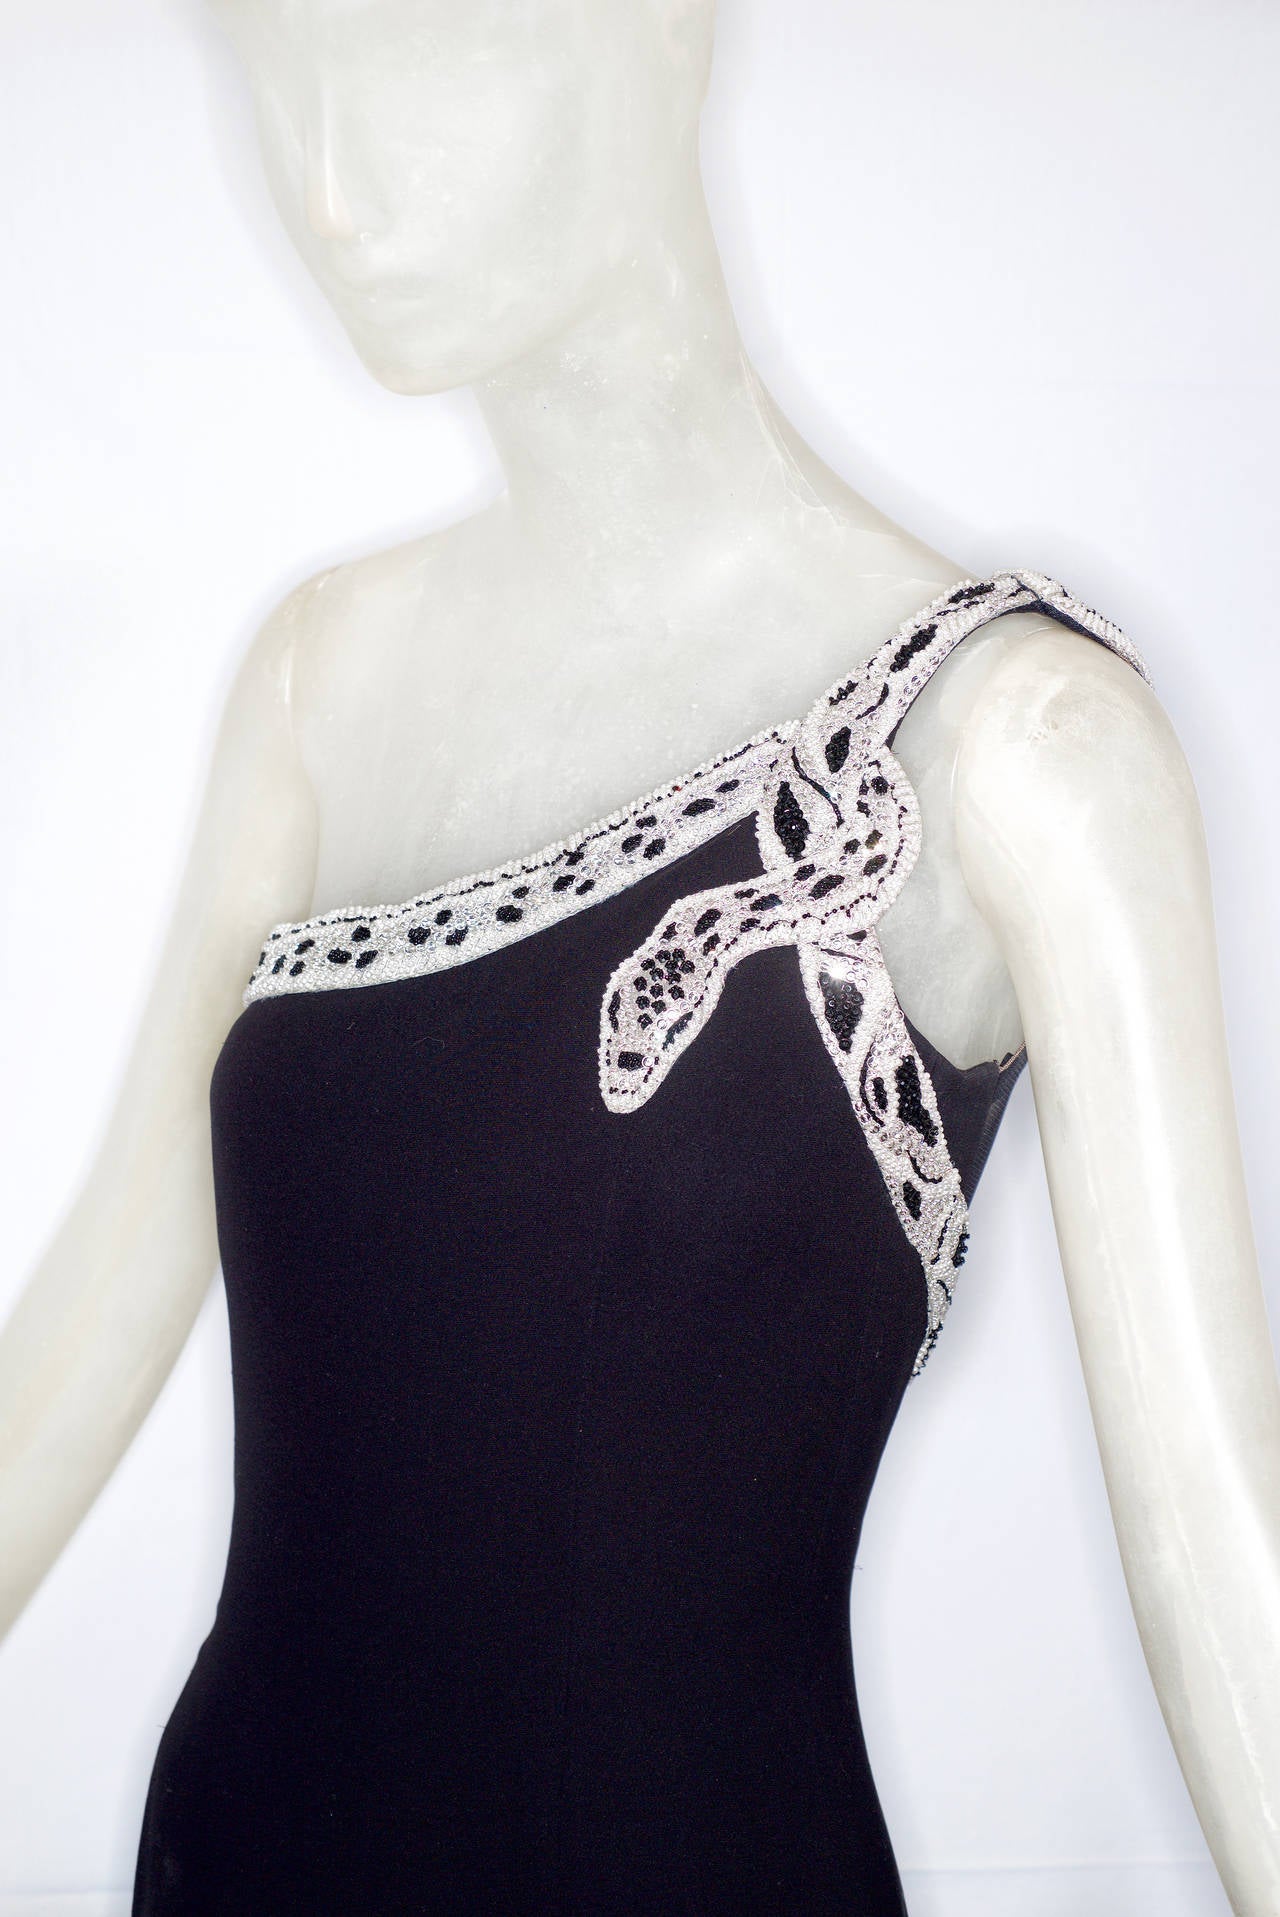 Extraordinary 1970s Valentino Haute Couture Gown with Bijoux-Embroidered Snake For Sale 1